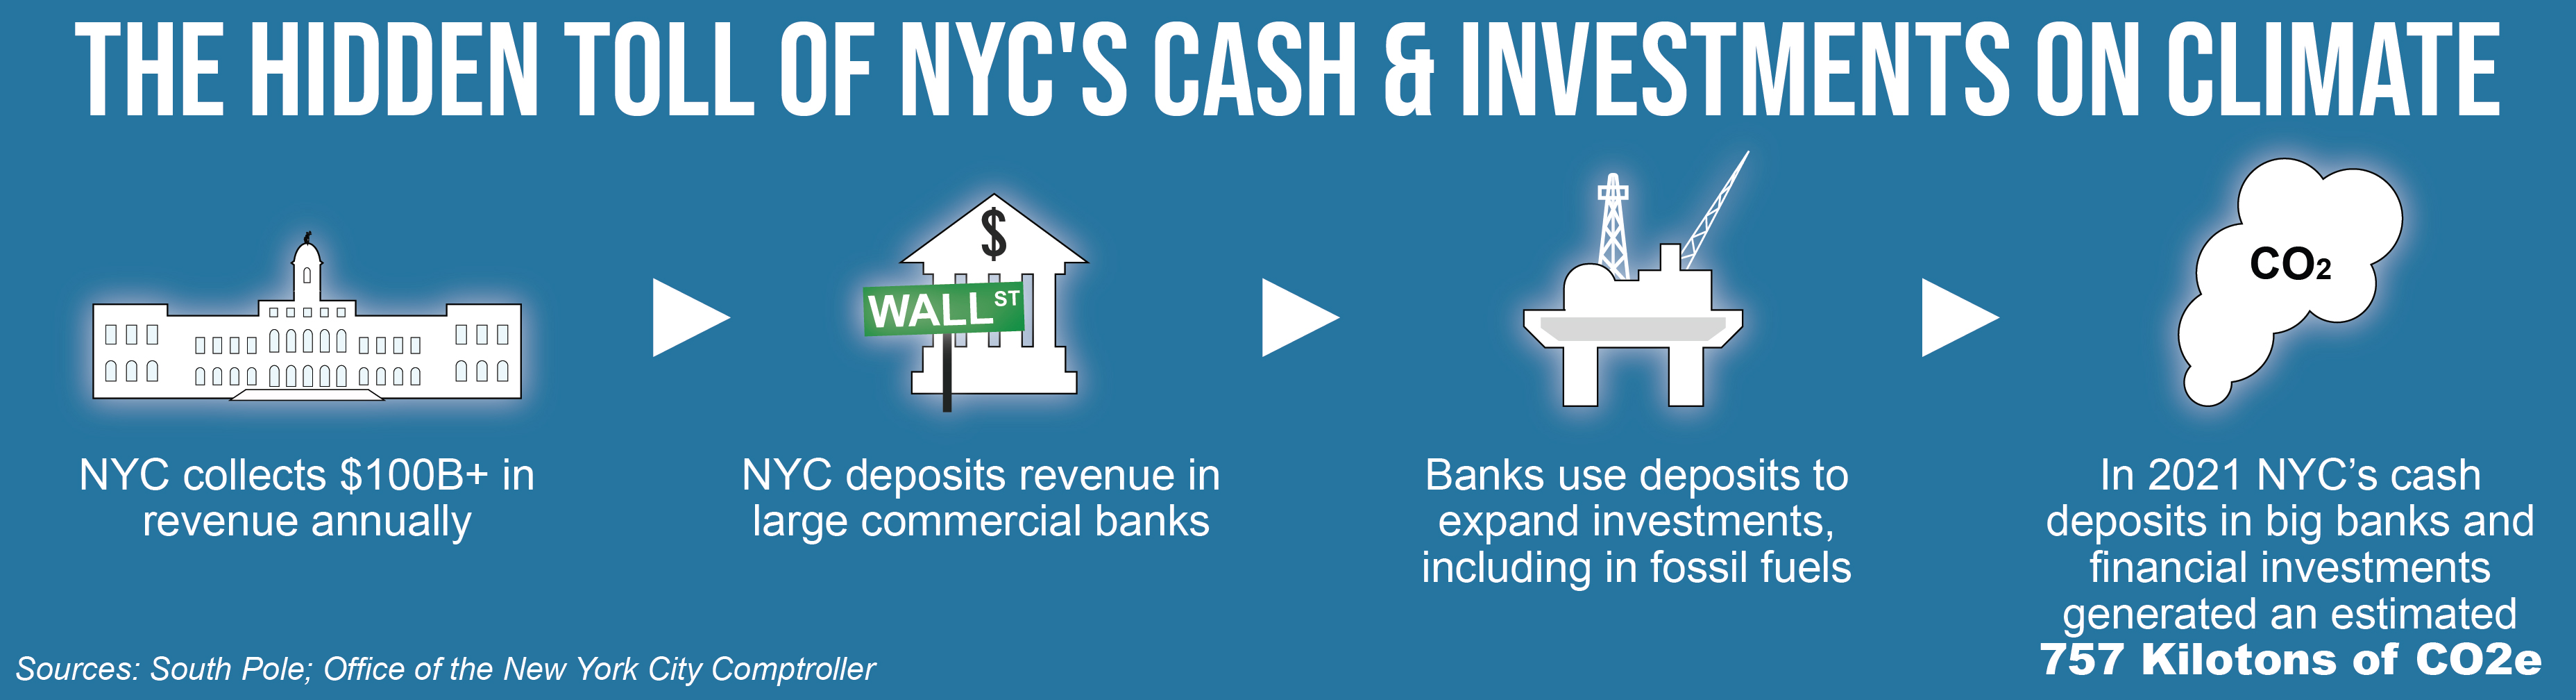 The Hidden Toll of NYC's Cash & Investments